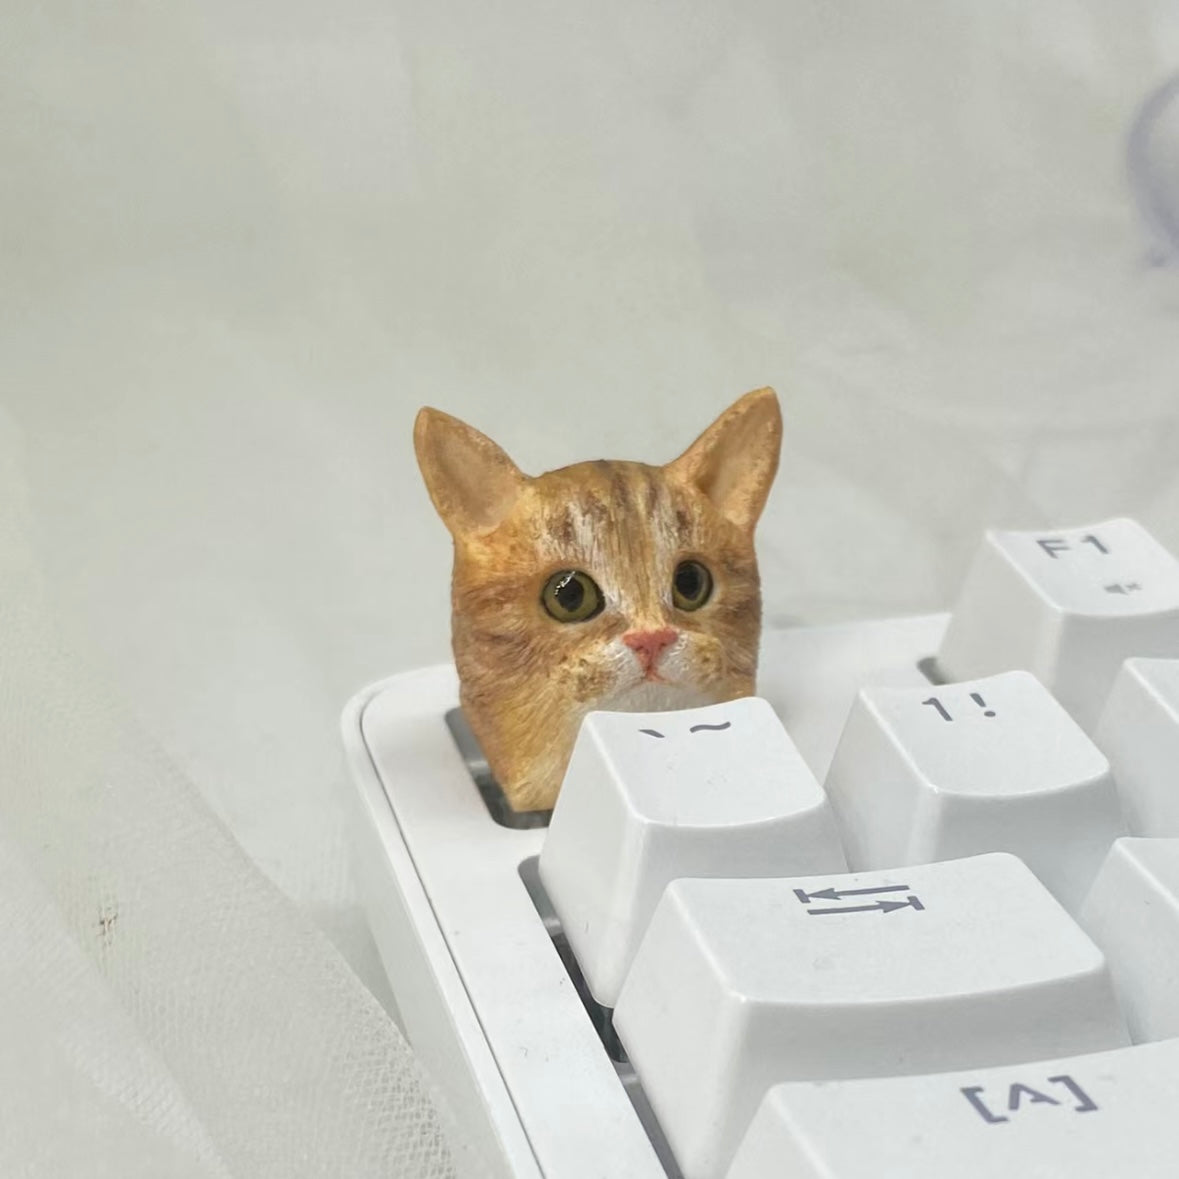 Artisan_Keycaps_for_Cats_and_Dogs_Customize_your_artisan_keycaps_17